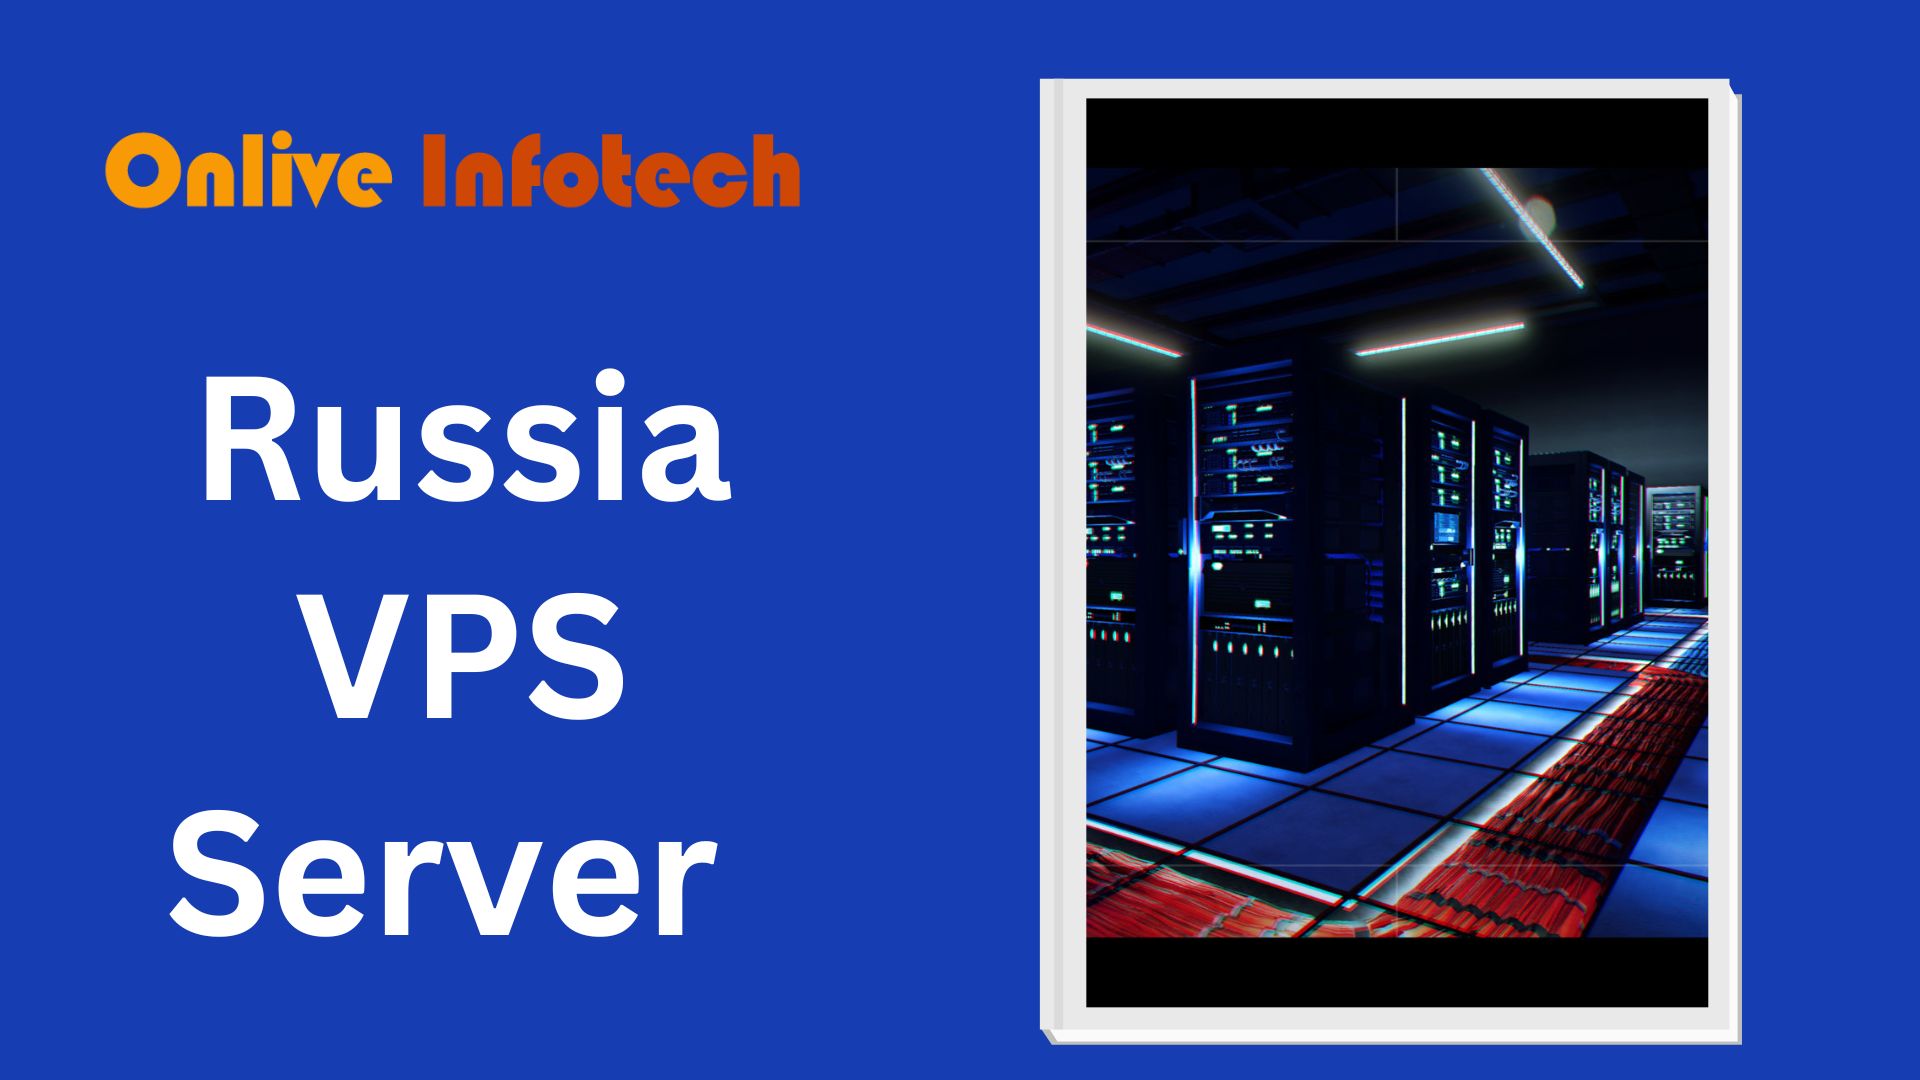 Host your online business website with Russia VPS Server Via Onliveinfotech.